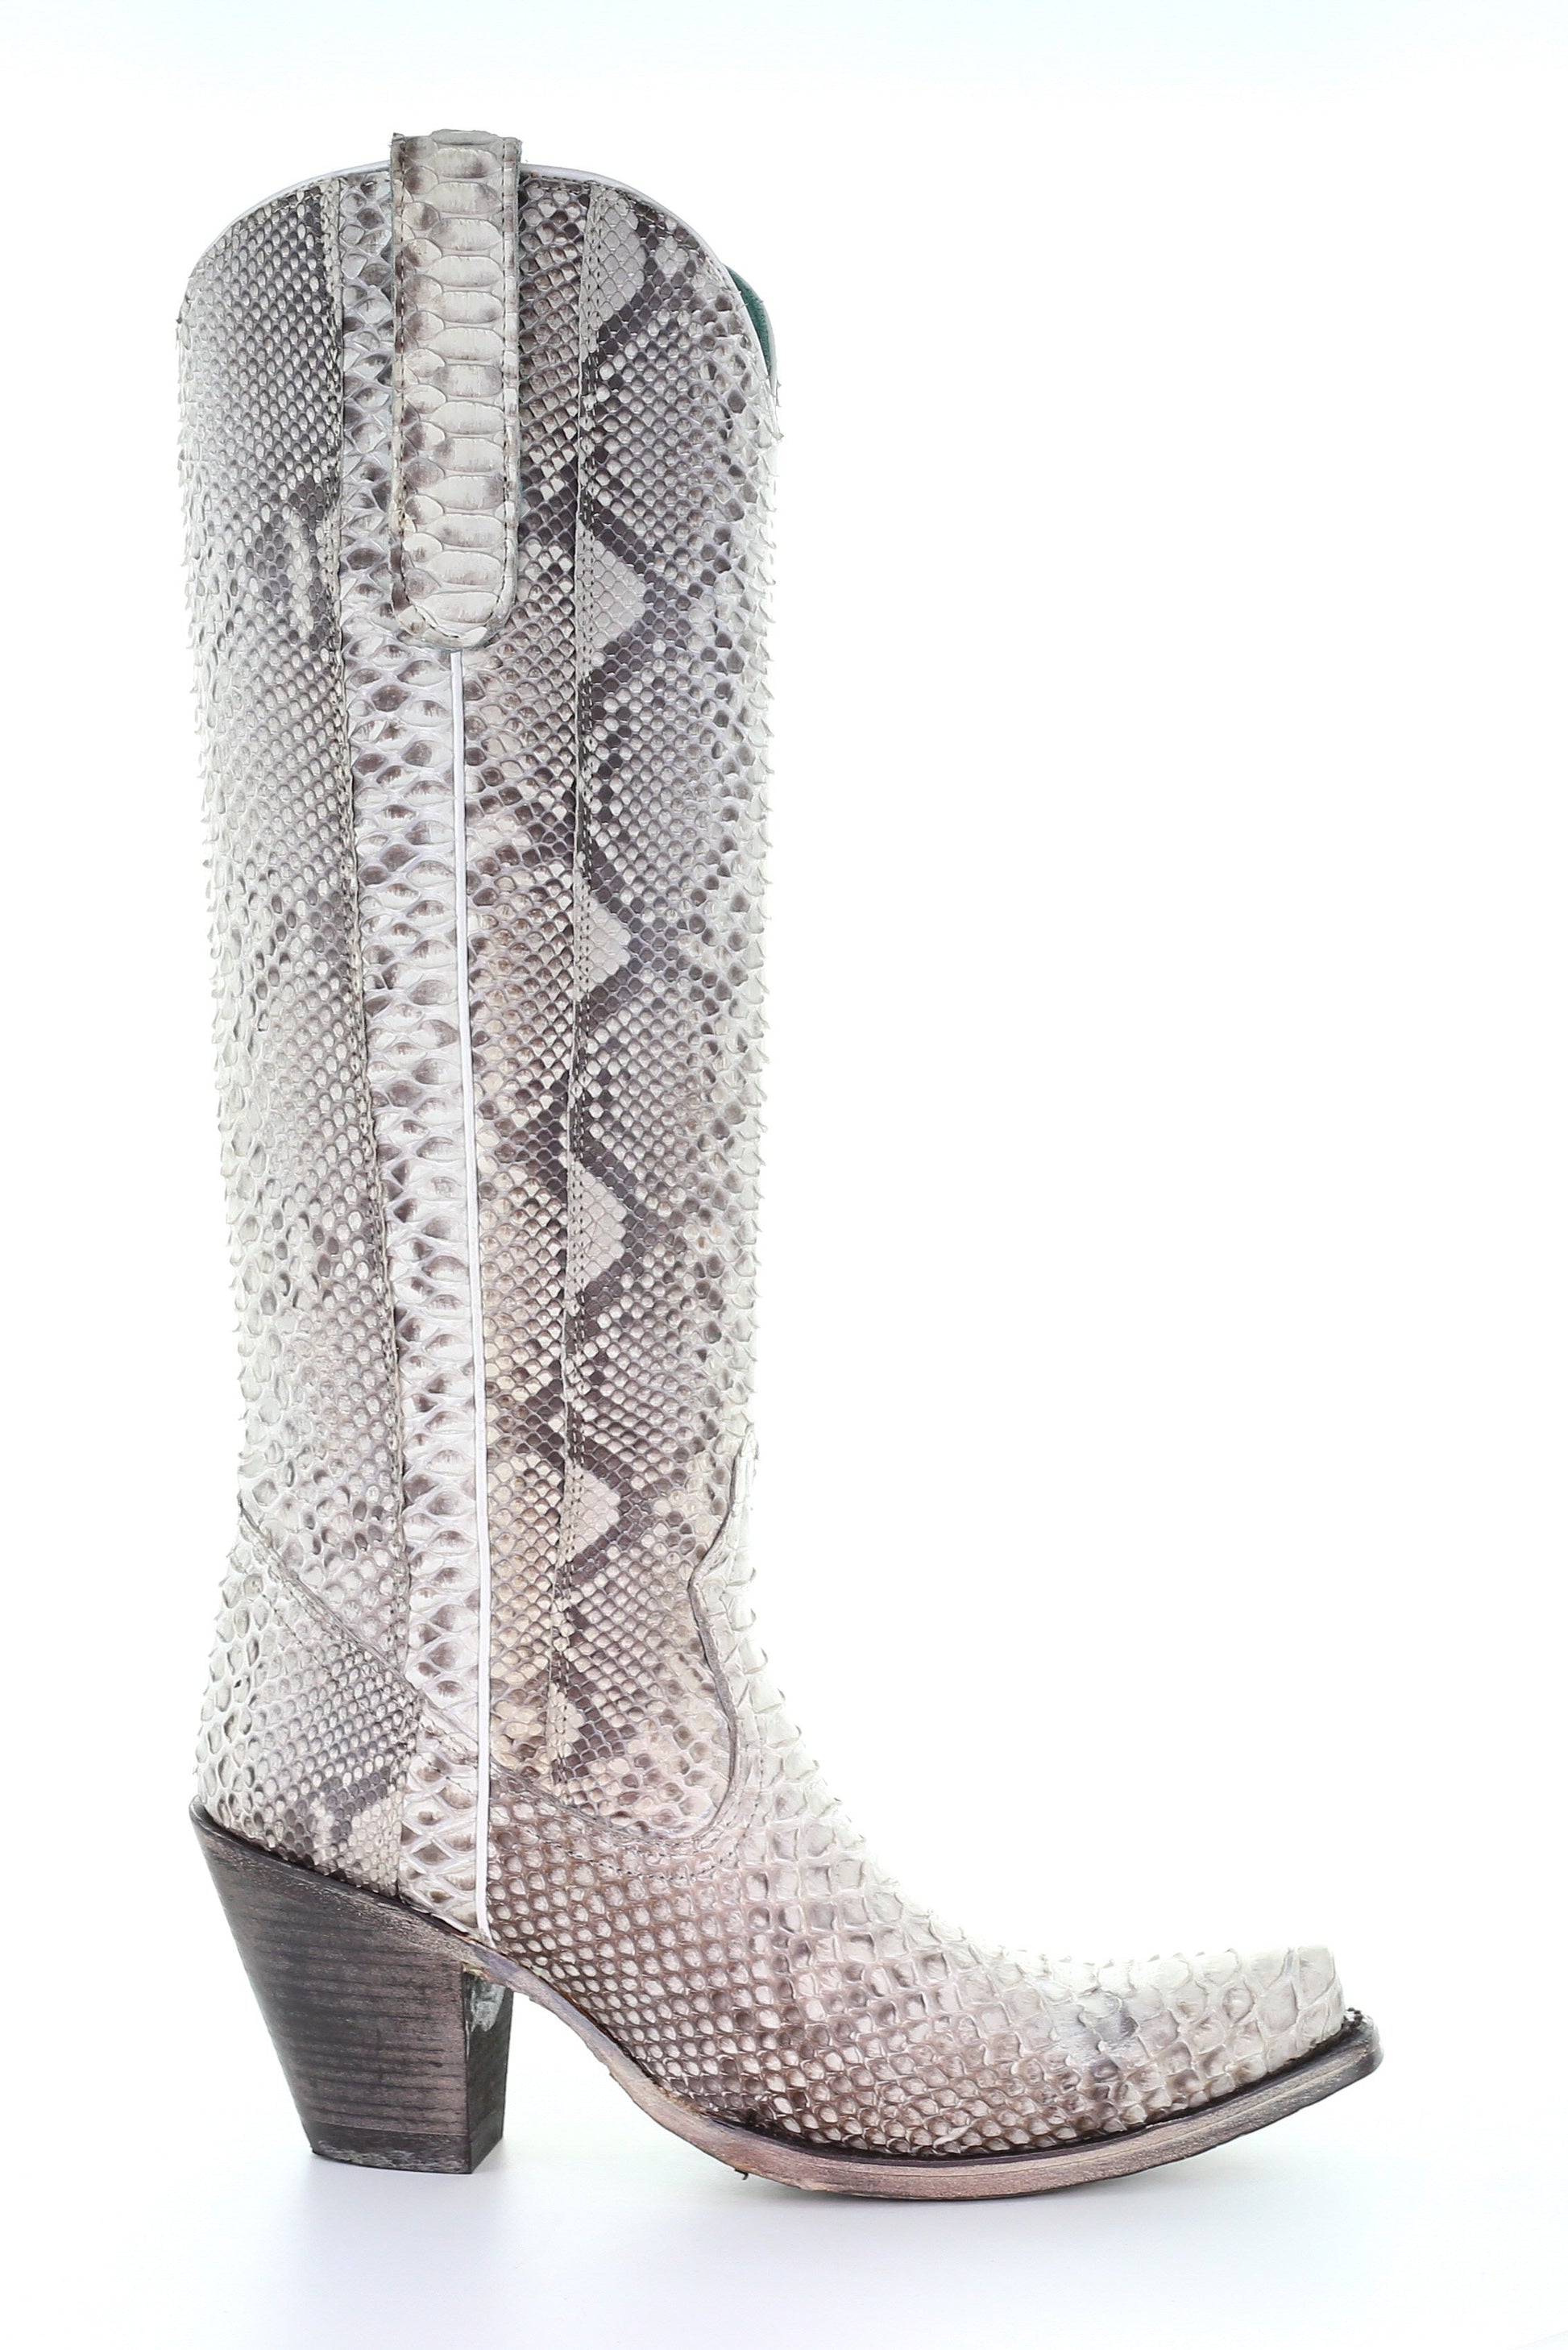 A3789 - Corral white western cowgirl python knee high boots for women-Kuet.us